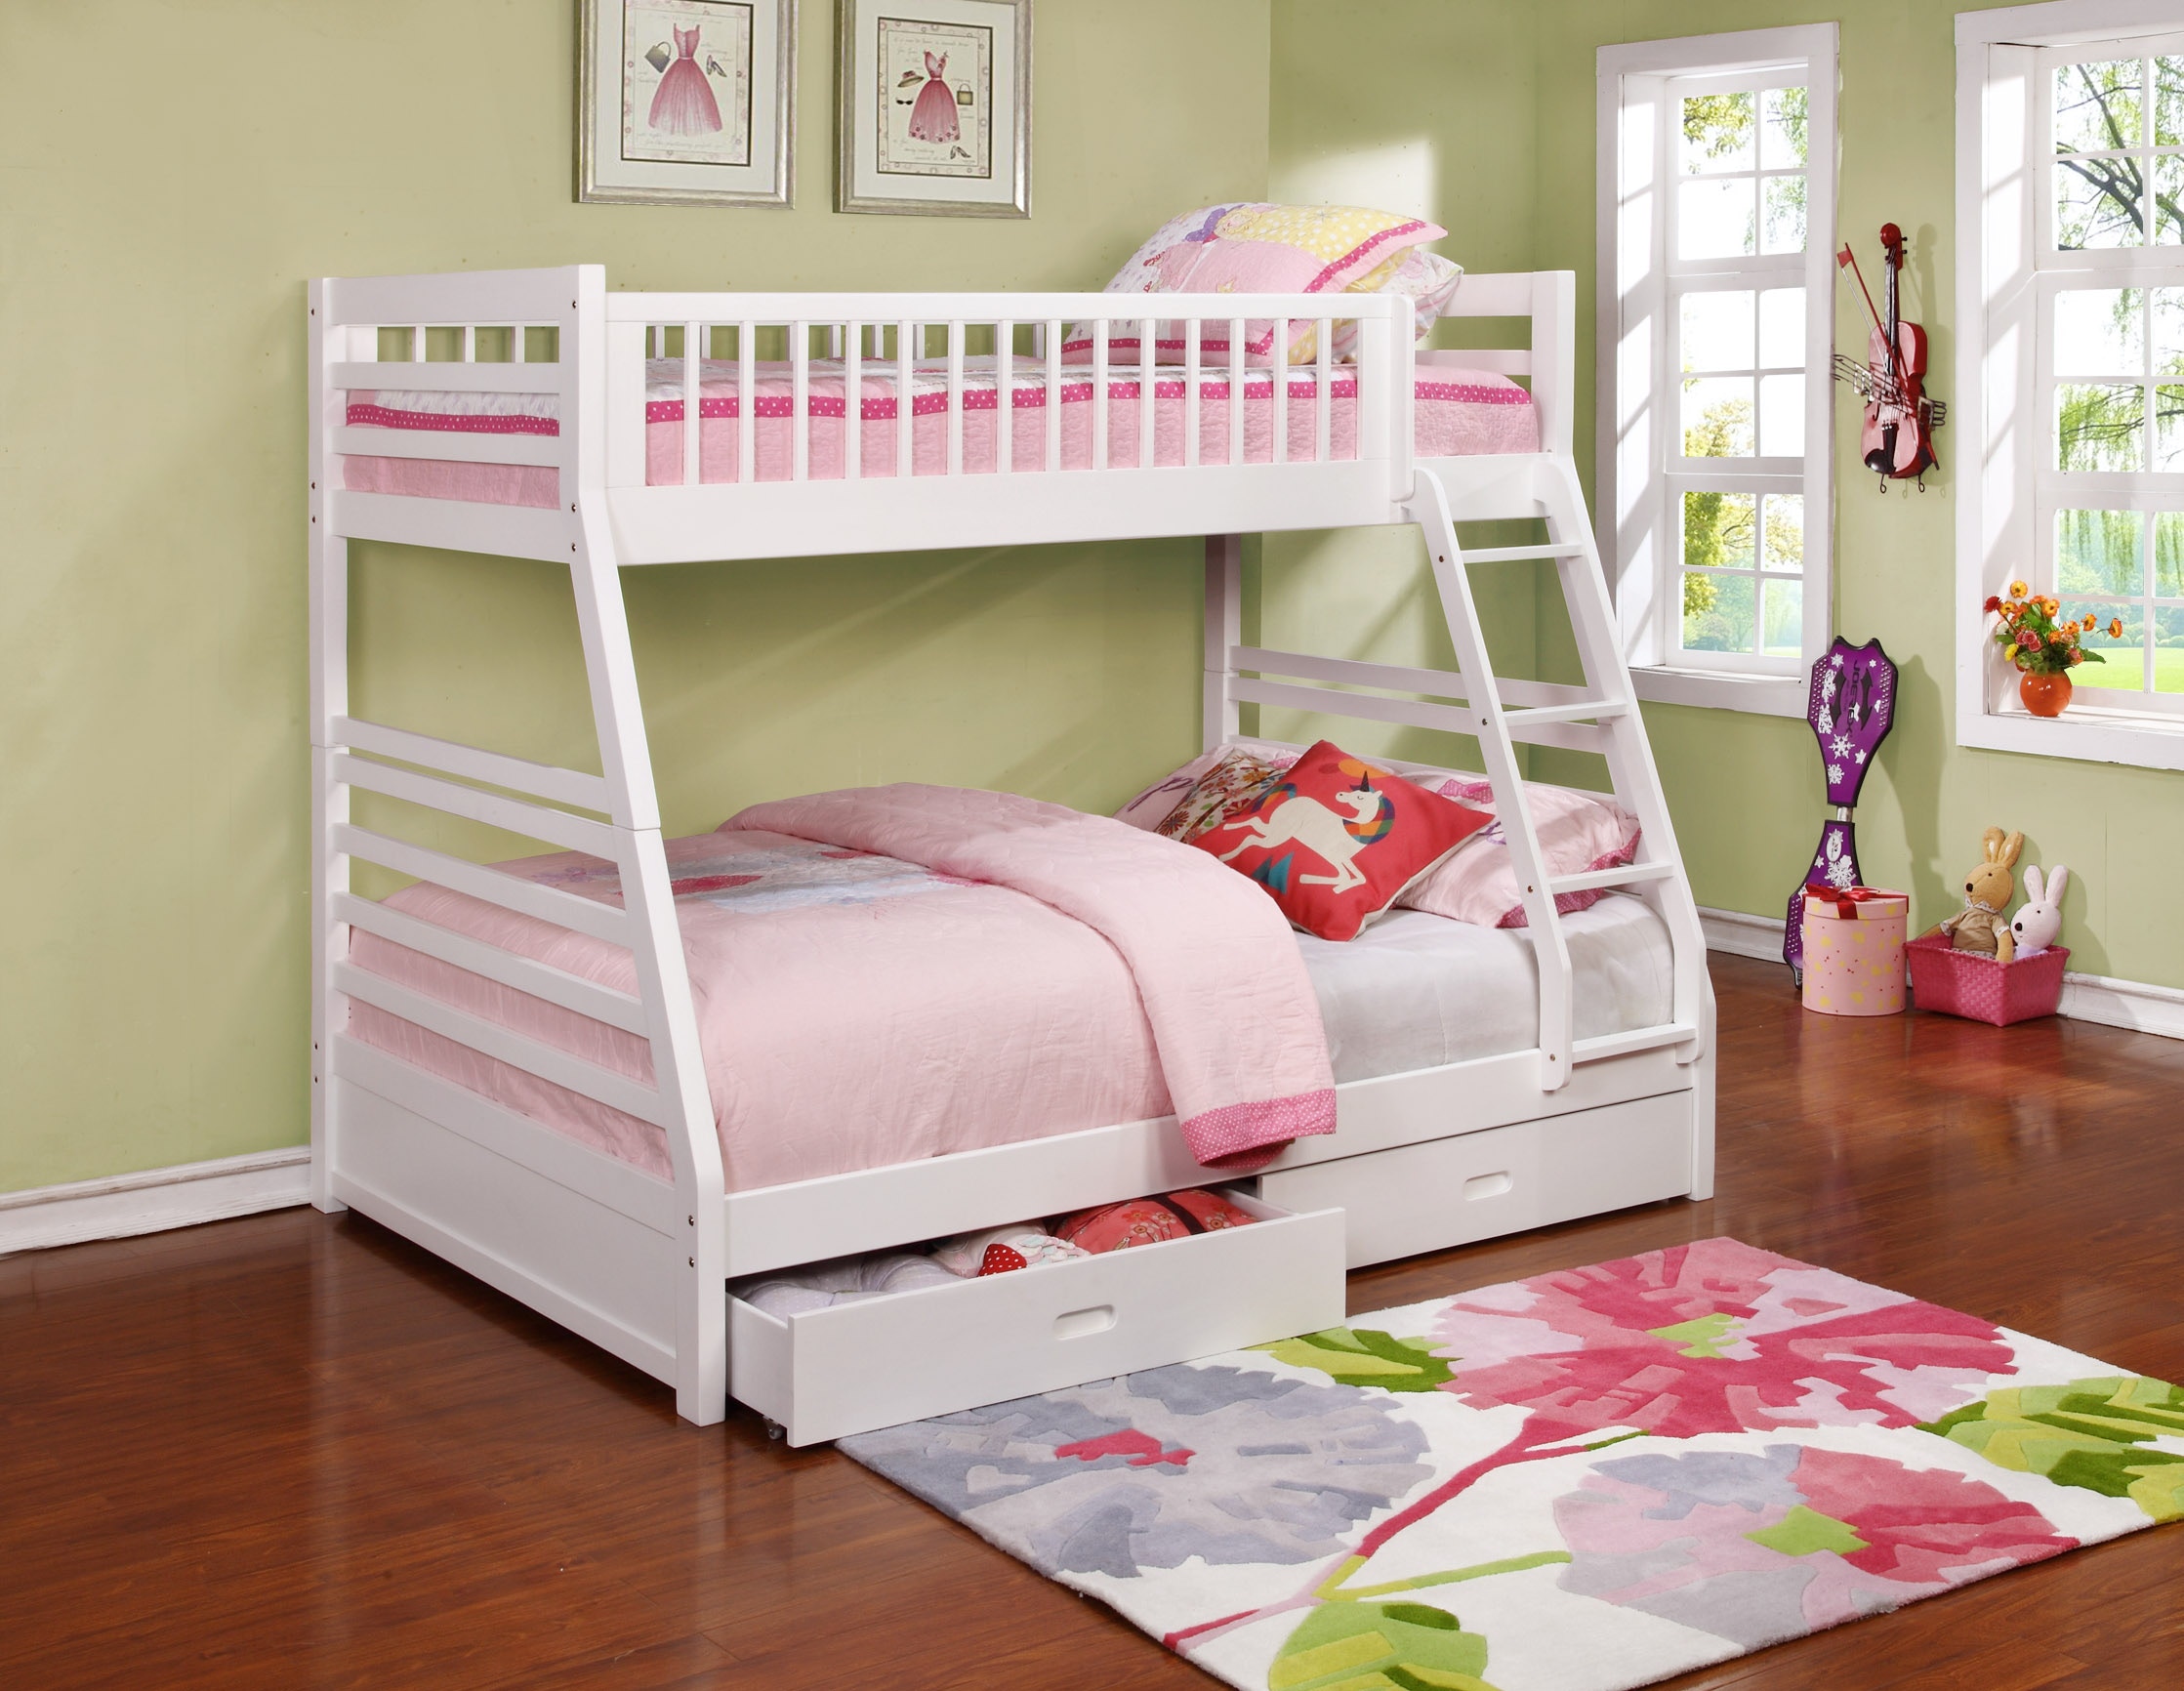 gallery furniture bunk beds